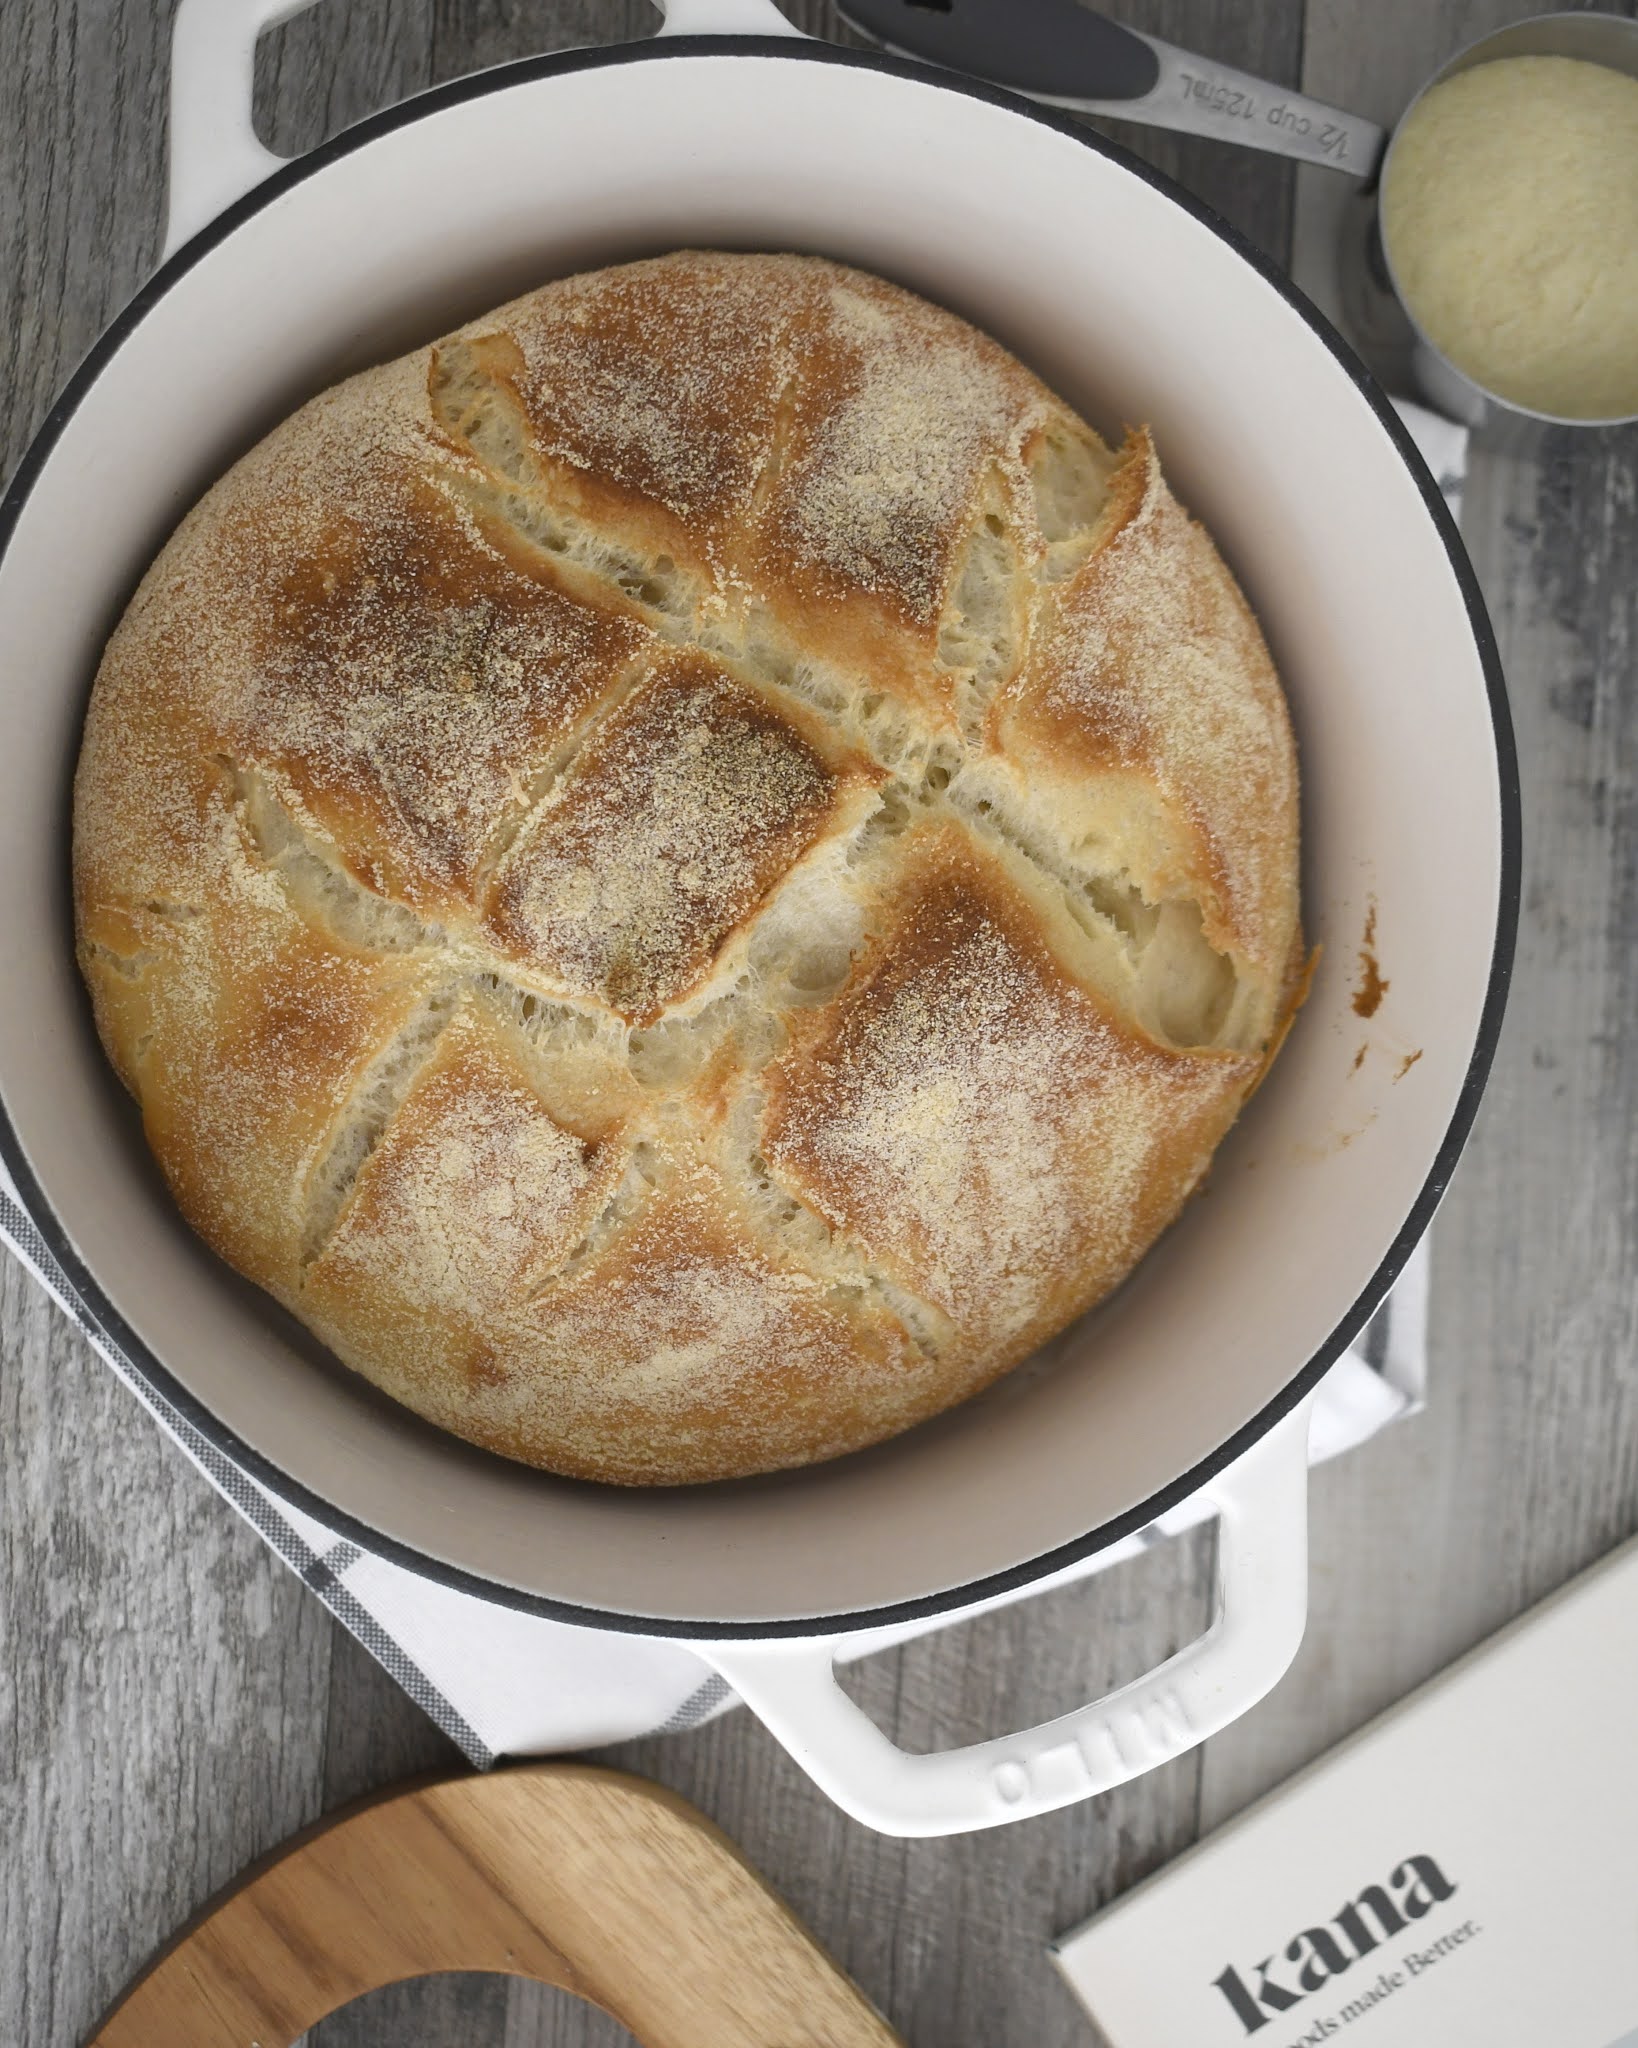 Cooking with Manuela: Best No-Knead Bread in a Dutch Oven Recipe